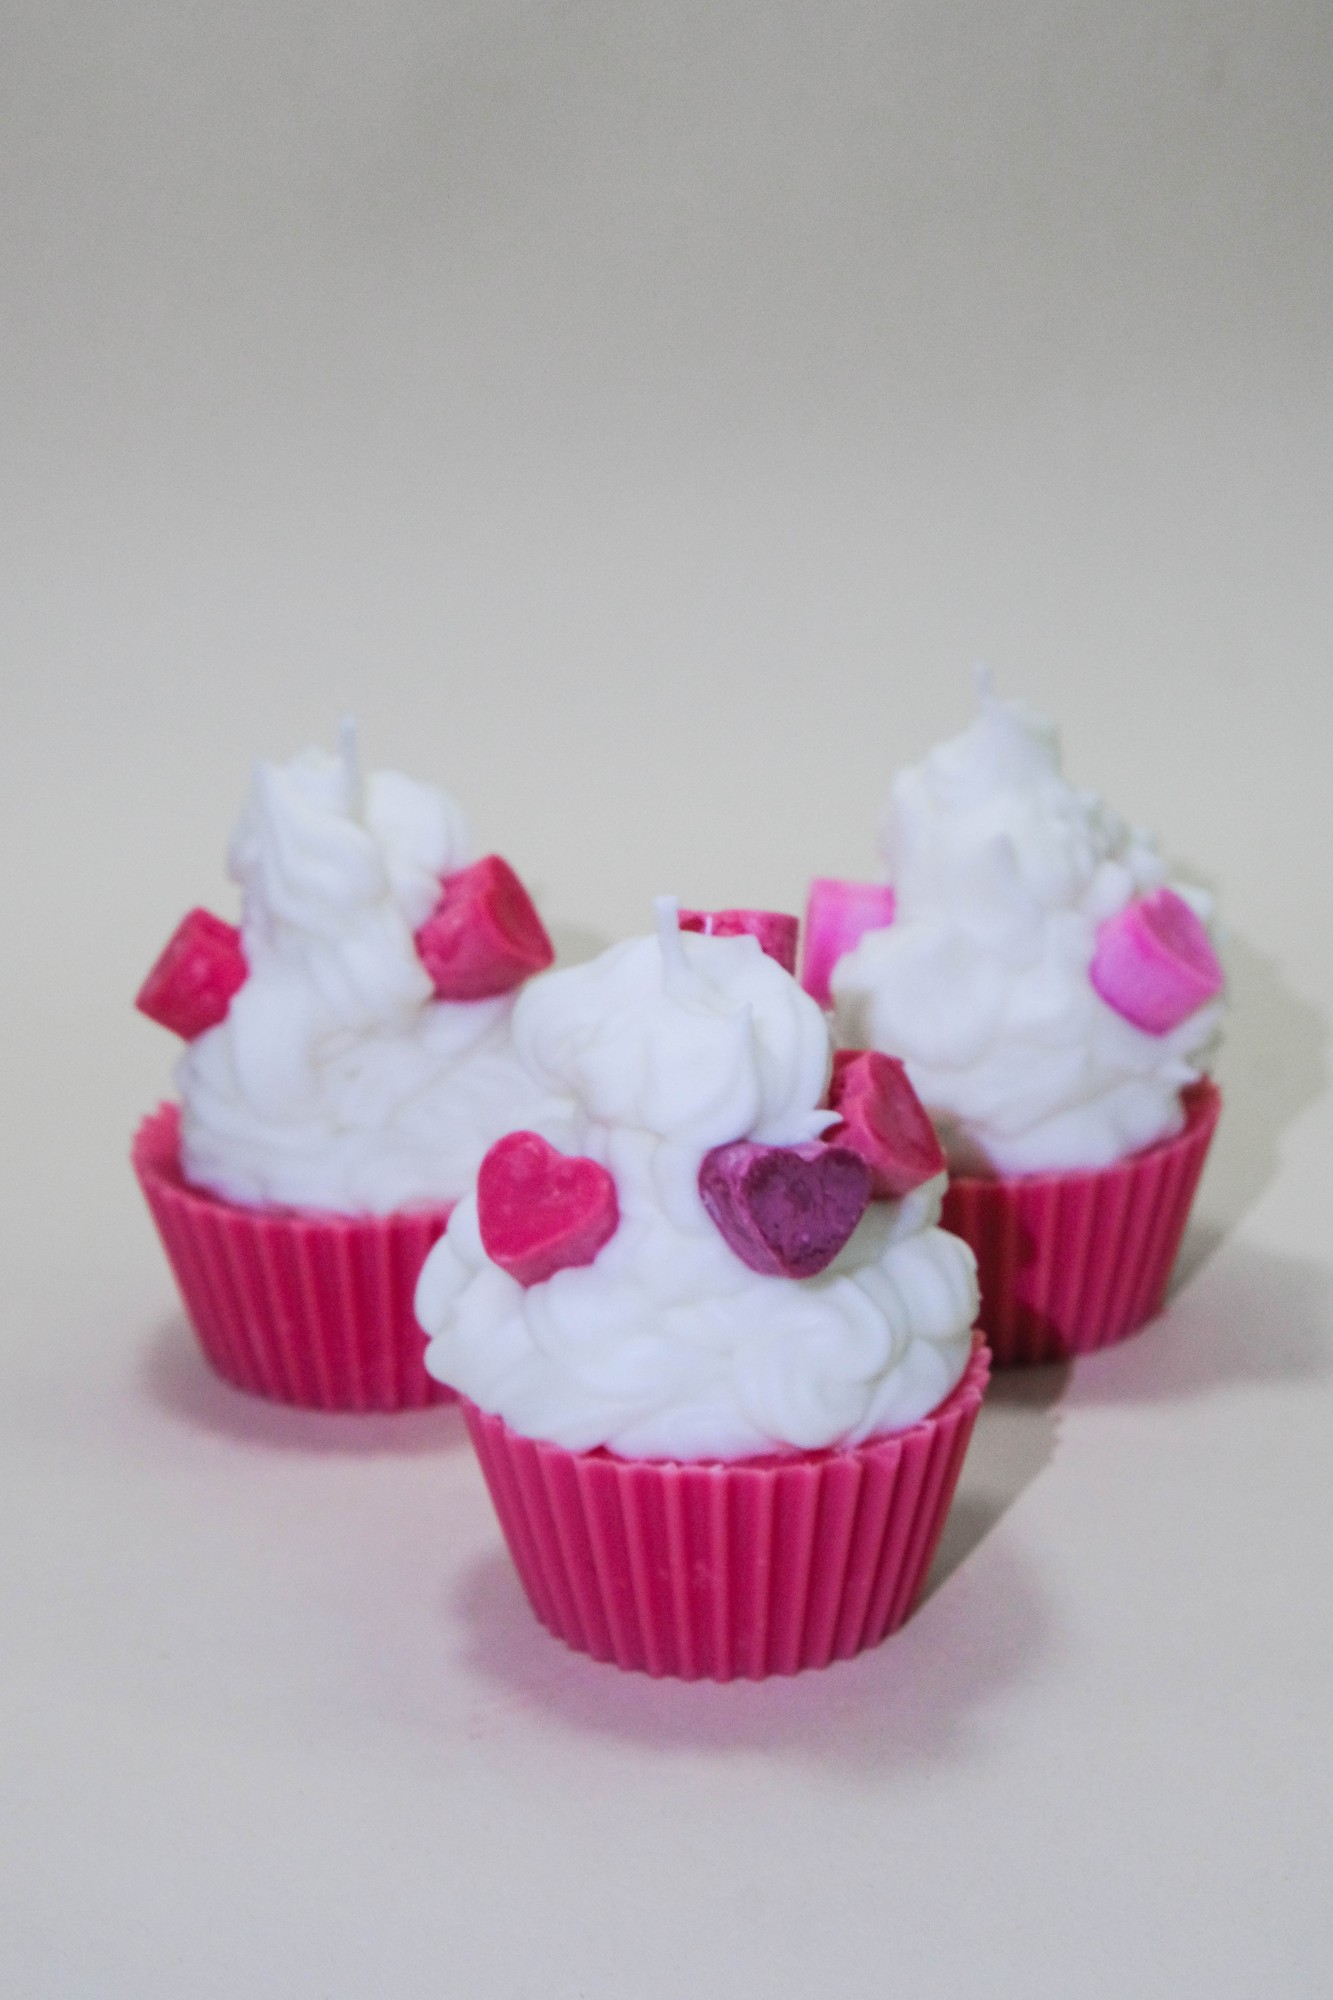 Cupcake candle "I love you", soy wax